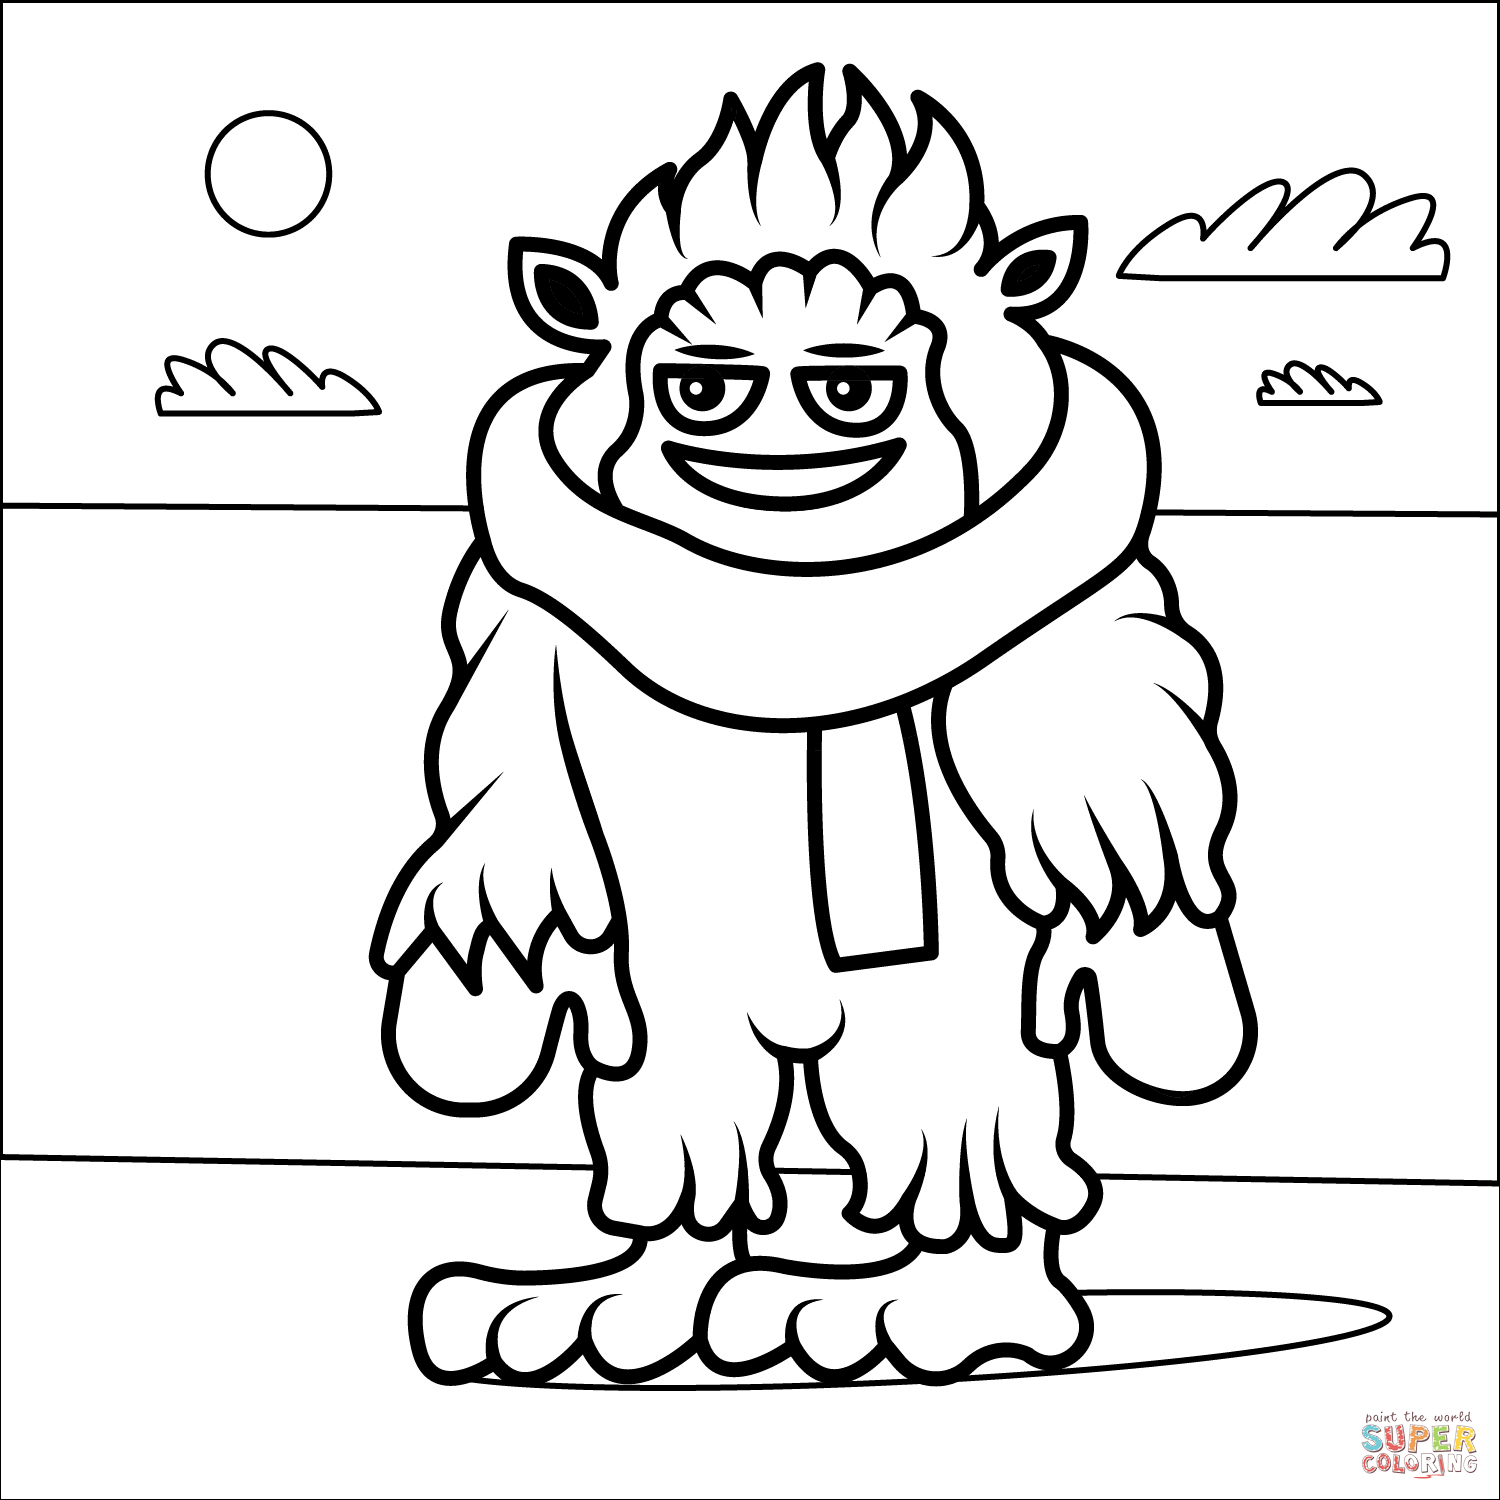 Christmas yeti coloring page free printable coloring pages